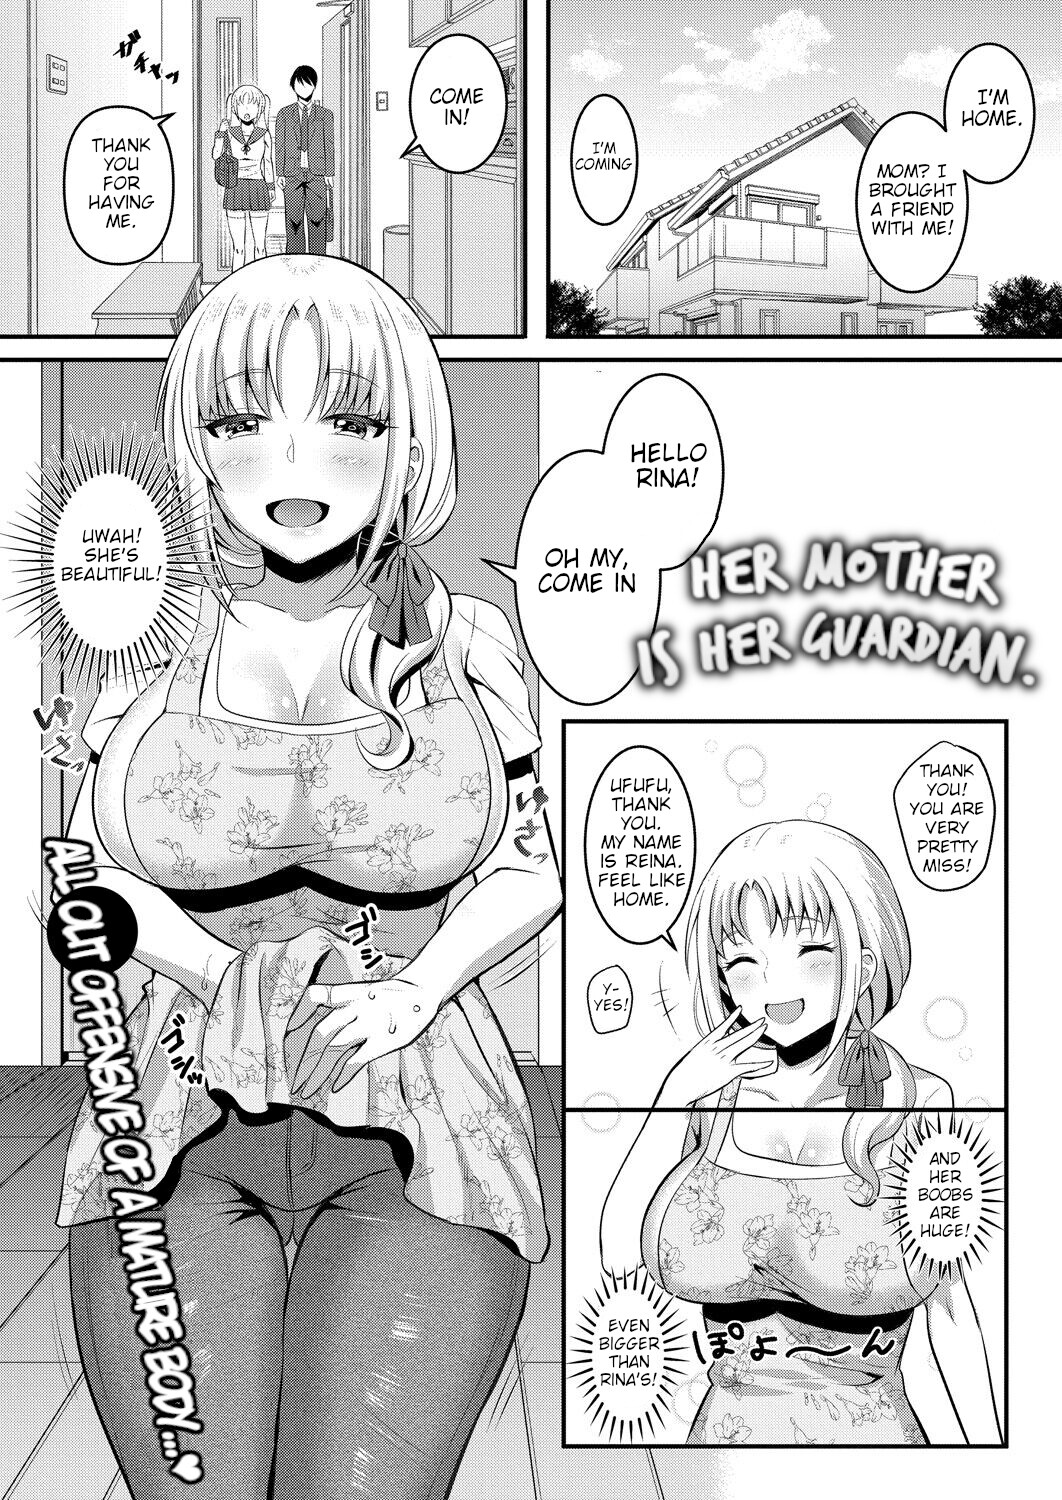 Hentai Manga Comic-Her Mother is Her Guardian-Read-1